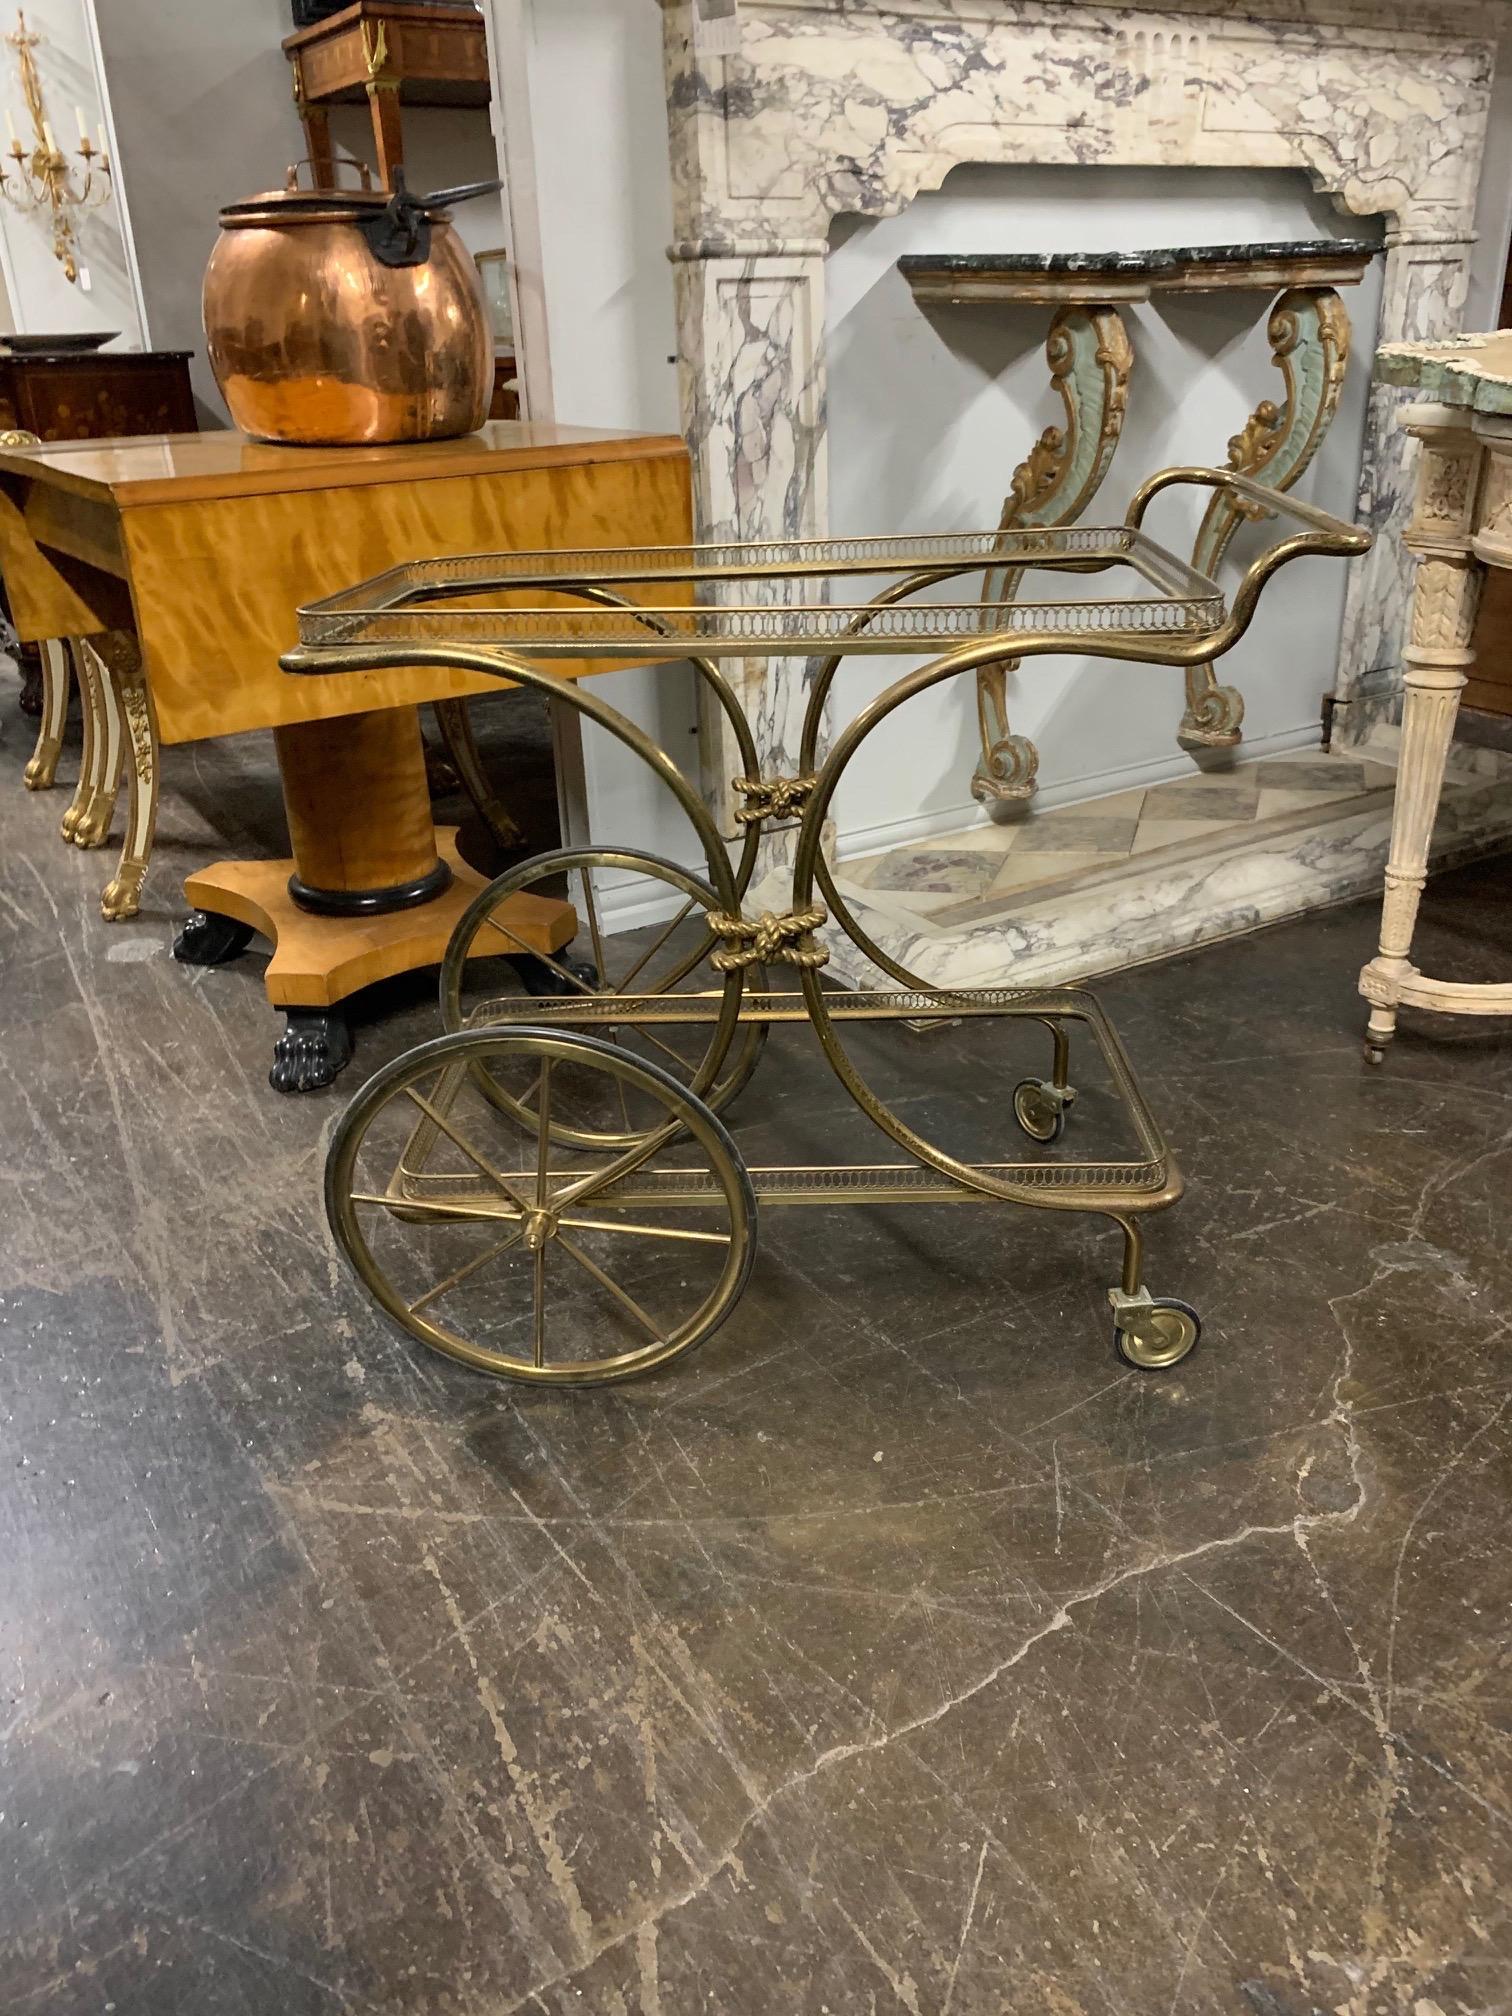 Beautiful decorative vintage brass bar cart. The piece has a glass top and another glass shelf on the bottom. A great accessory!